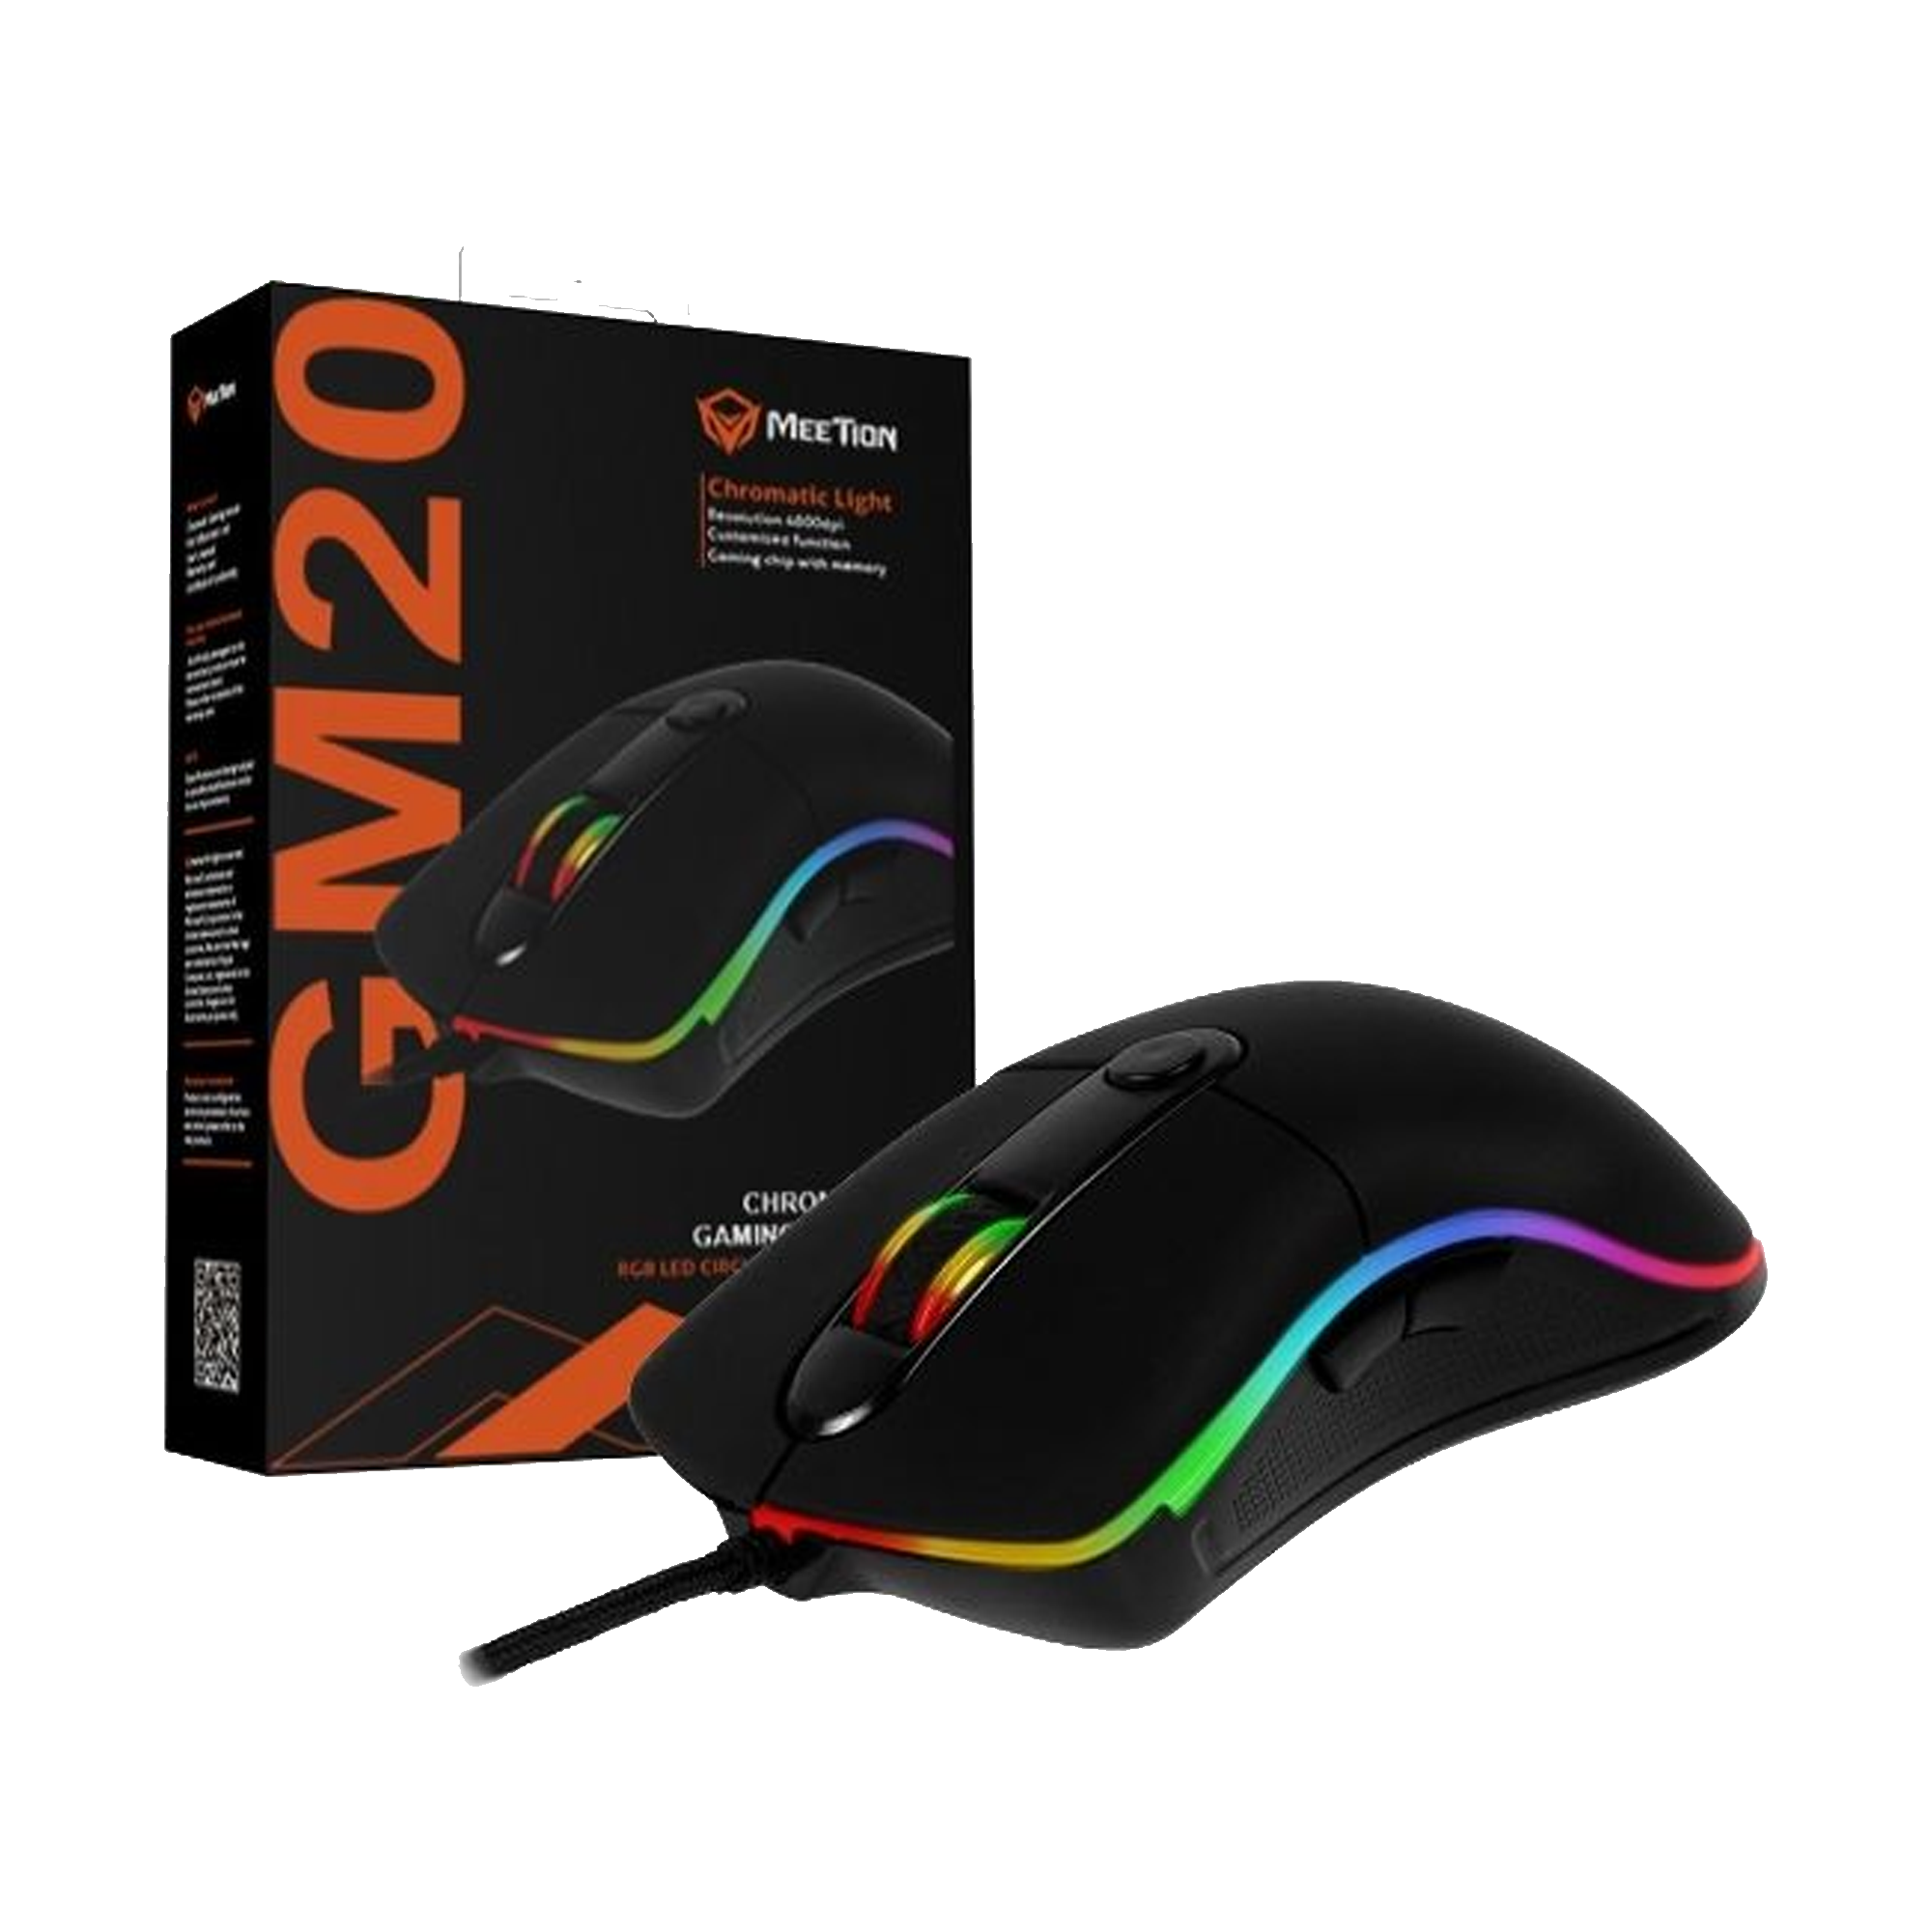 MEETION GM20 RGB Chromatic Gaming Mouse | MT-GM20